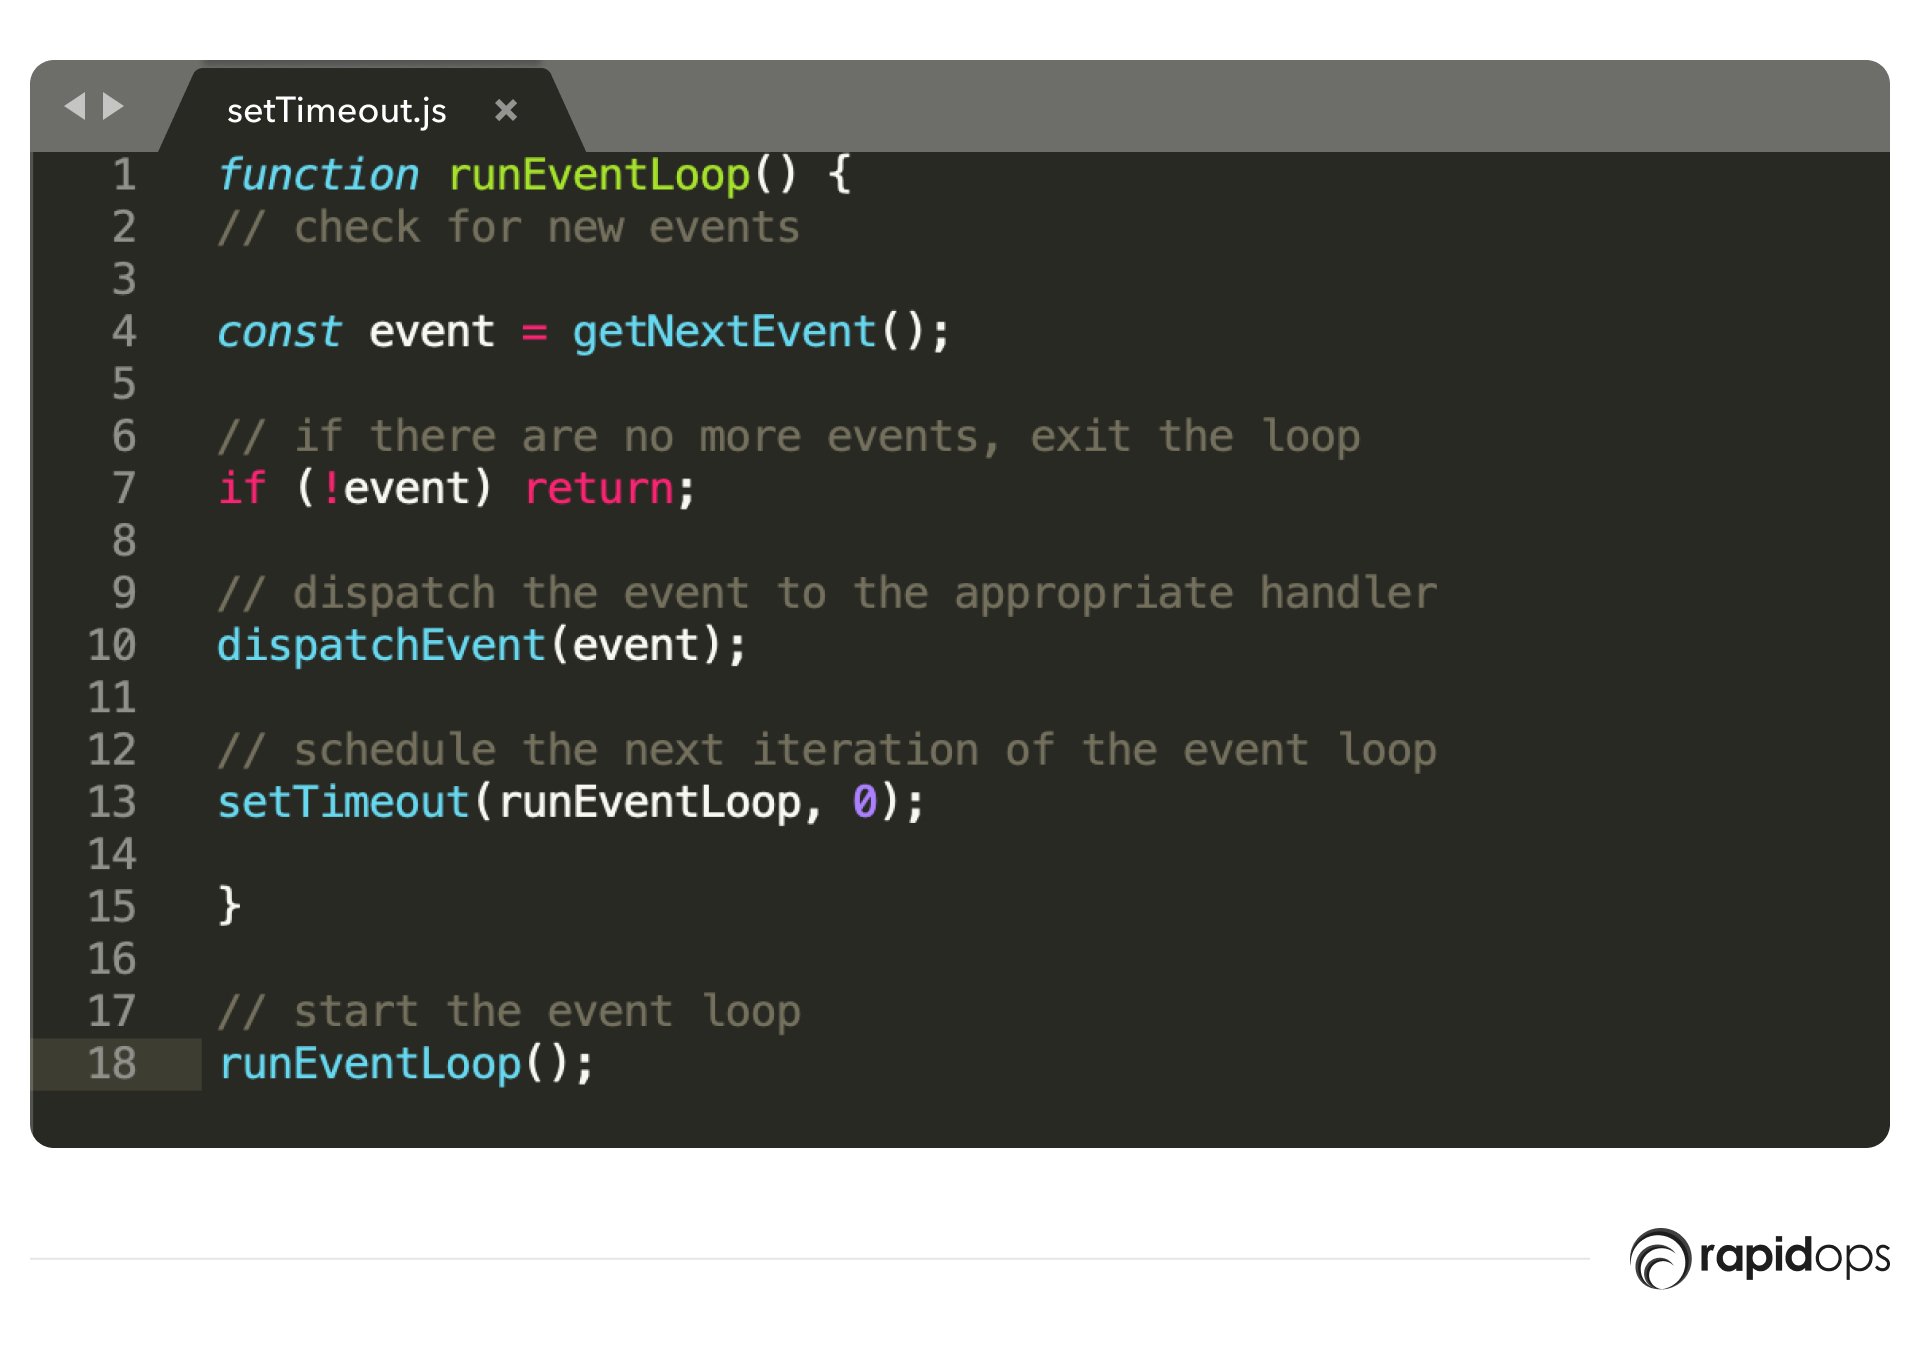 Event loop implemented using setTimeout